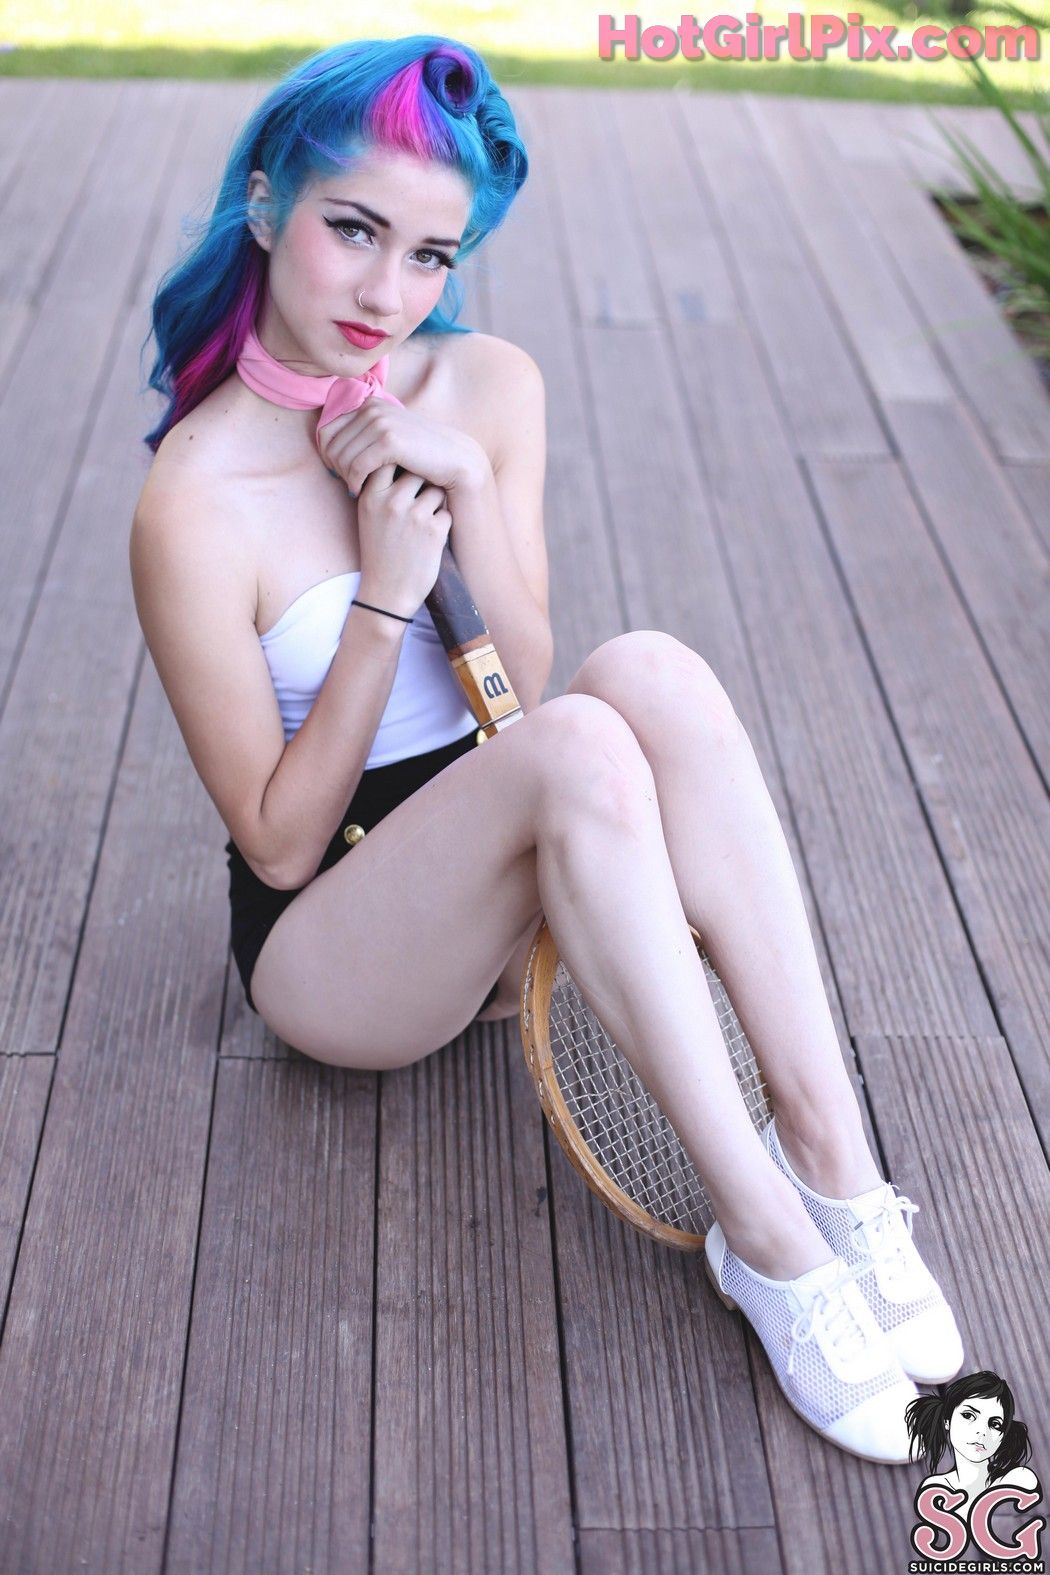 [Suicide Girls] Fay - Match Point